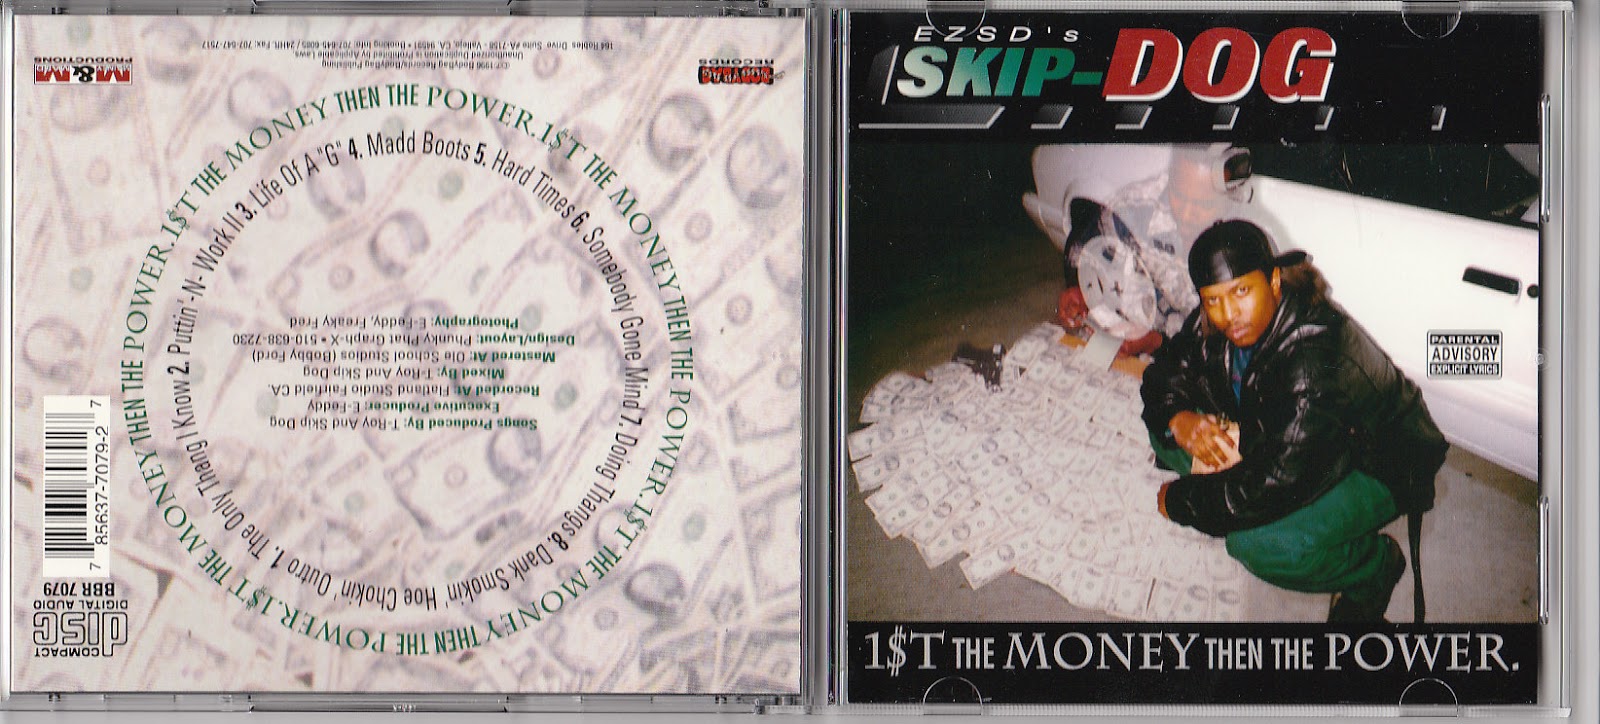 Skip Dog – 1$t The Money Then The Power (1996)